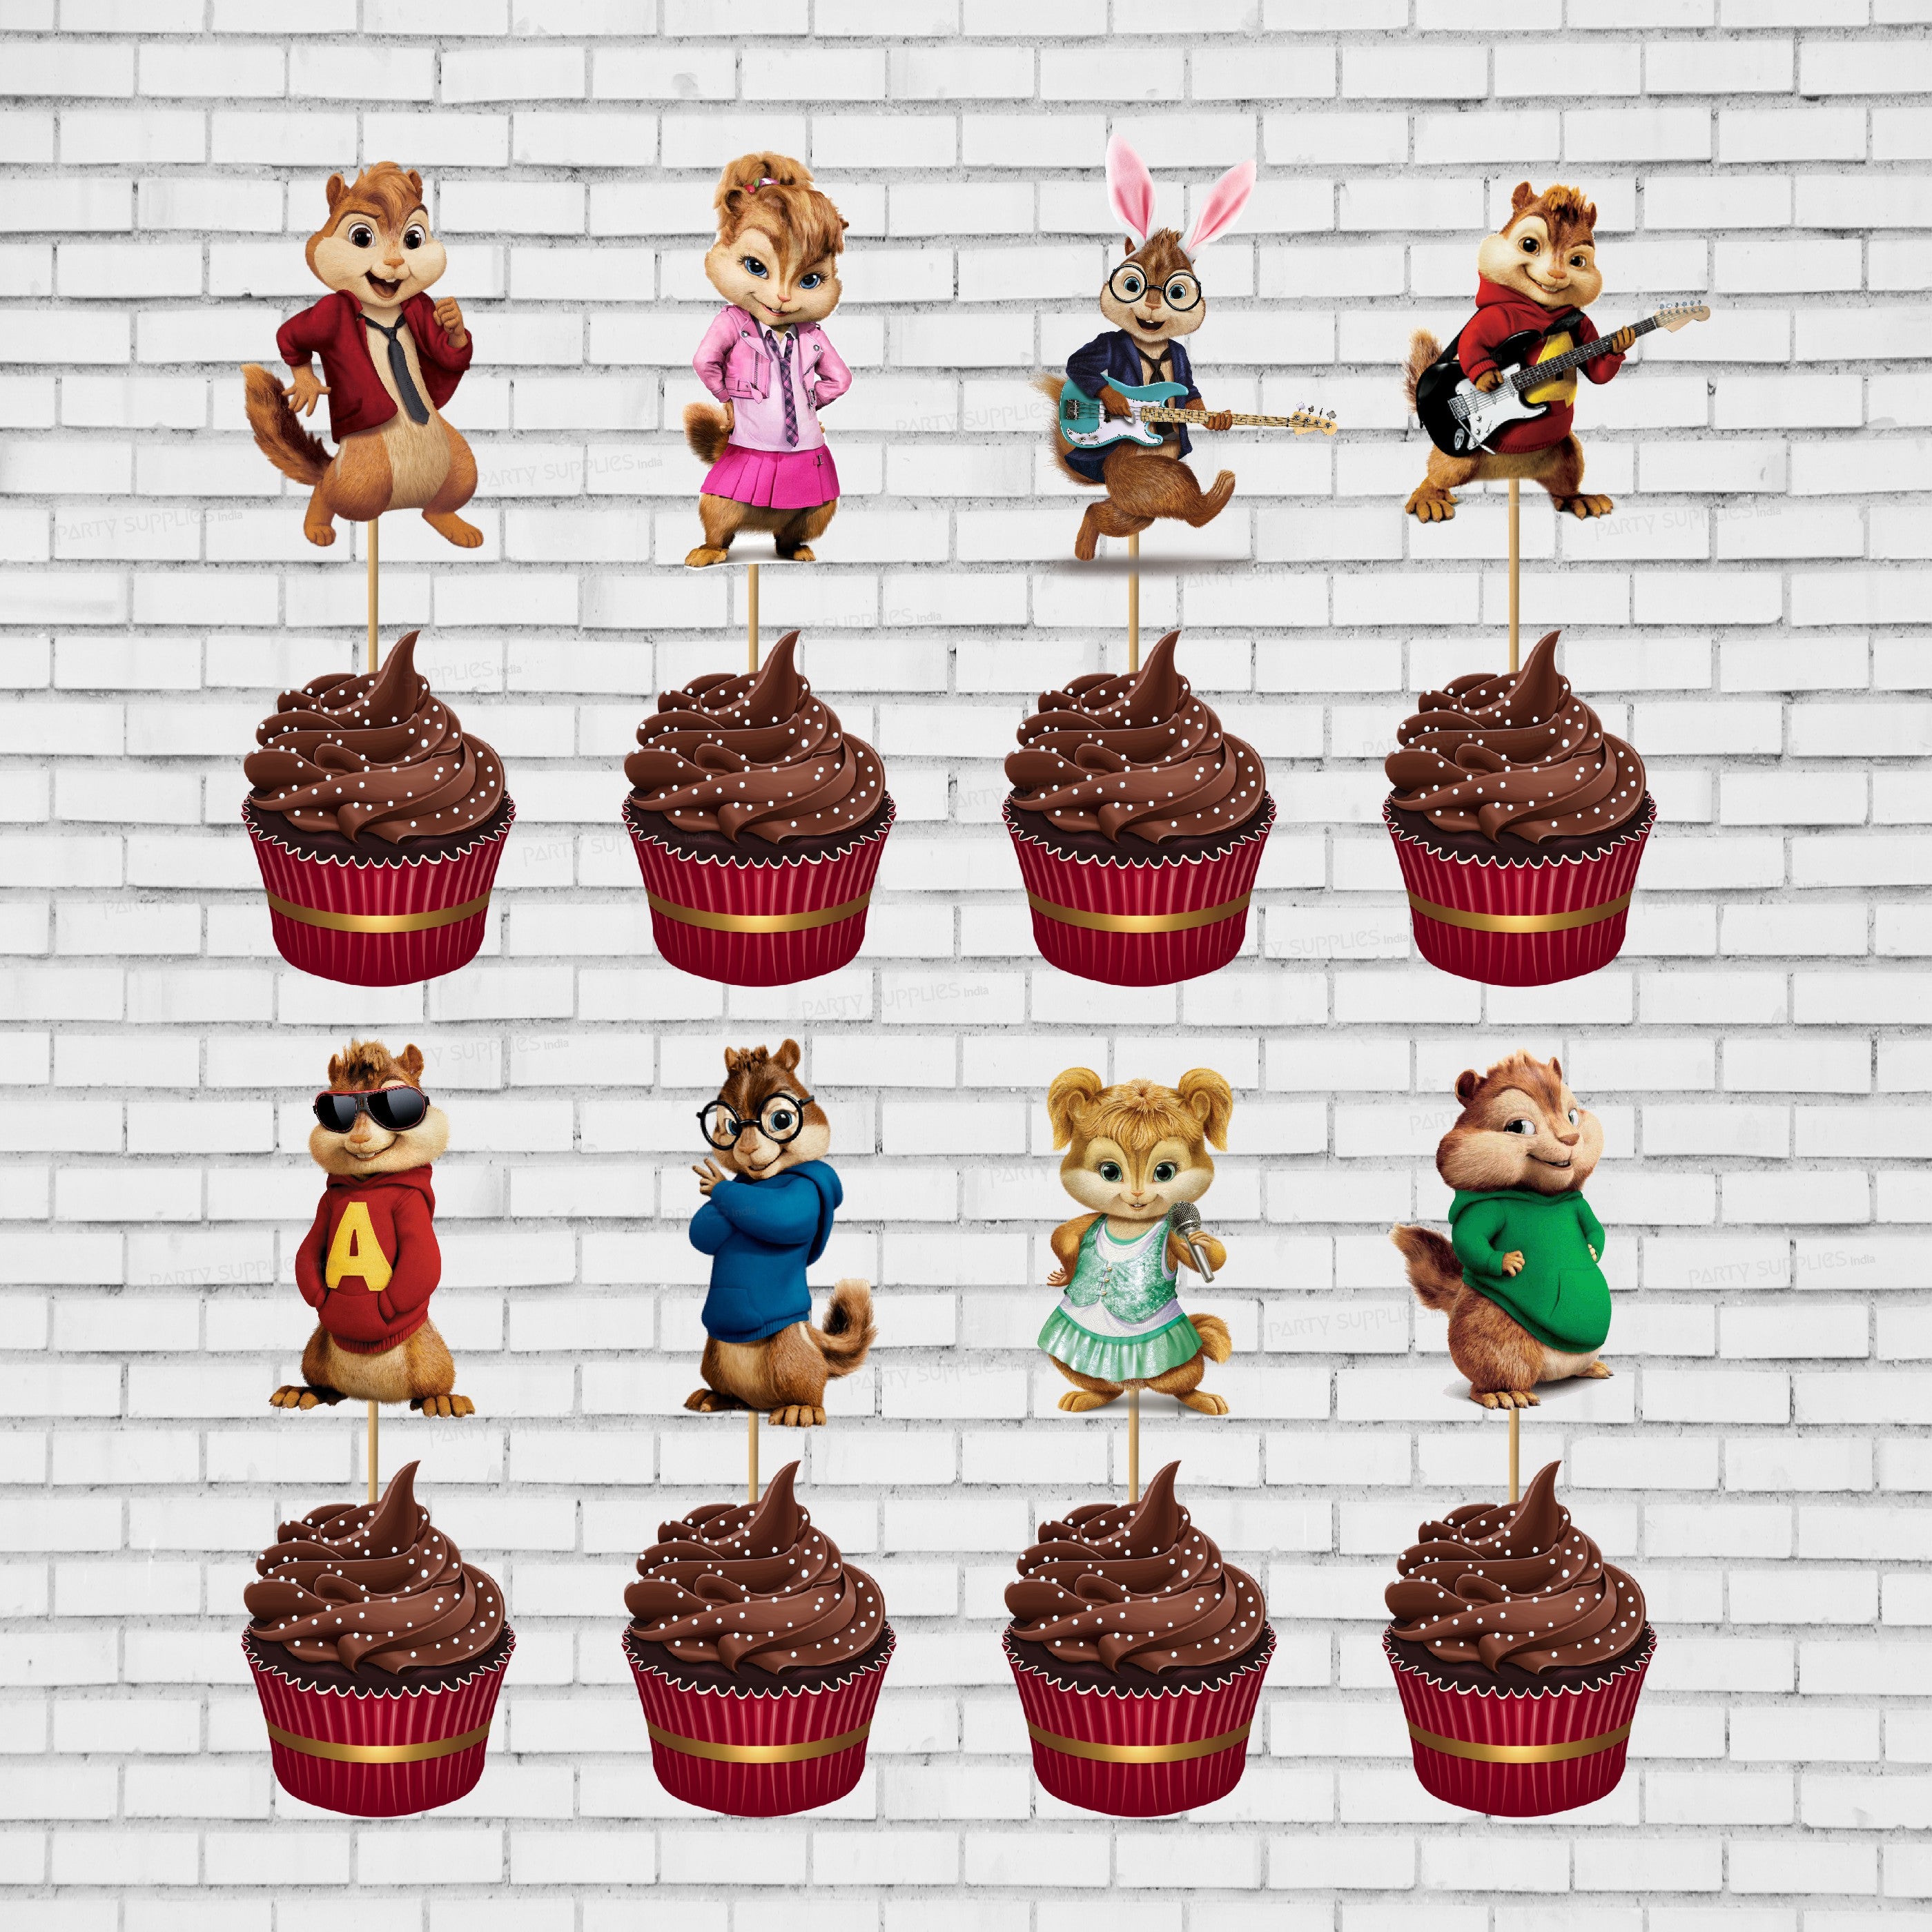 WoW Party Studio P J Cartoon Theme Happy Birthday Cake Toppers Set 5Pcs for  Boys,Kids Parties/1st, First Bday Decorations/Girls, Toddlers, Babies Birth  Day Cake Decor Item : Amazon.in: Toys & Games